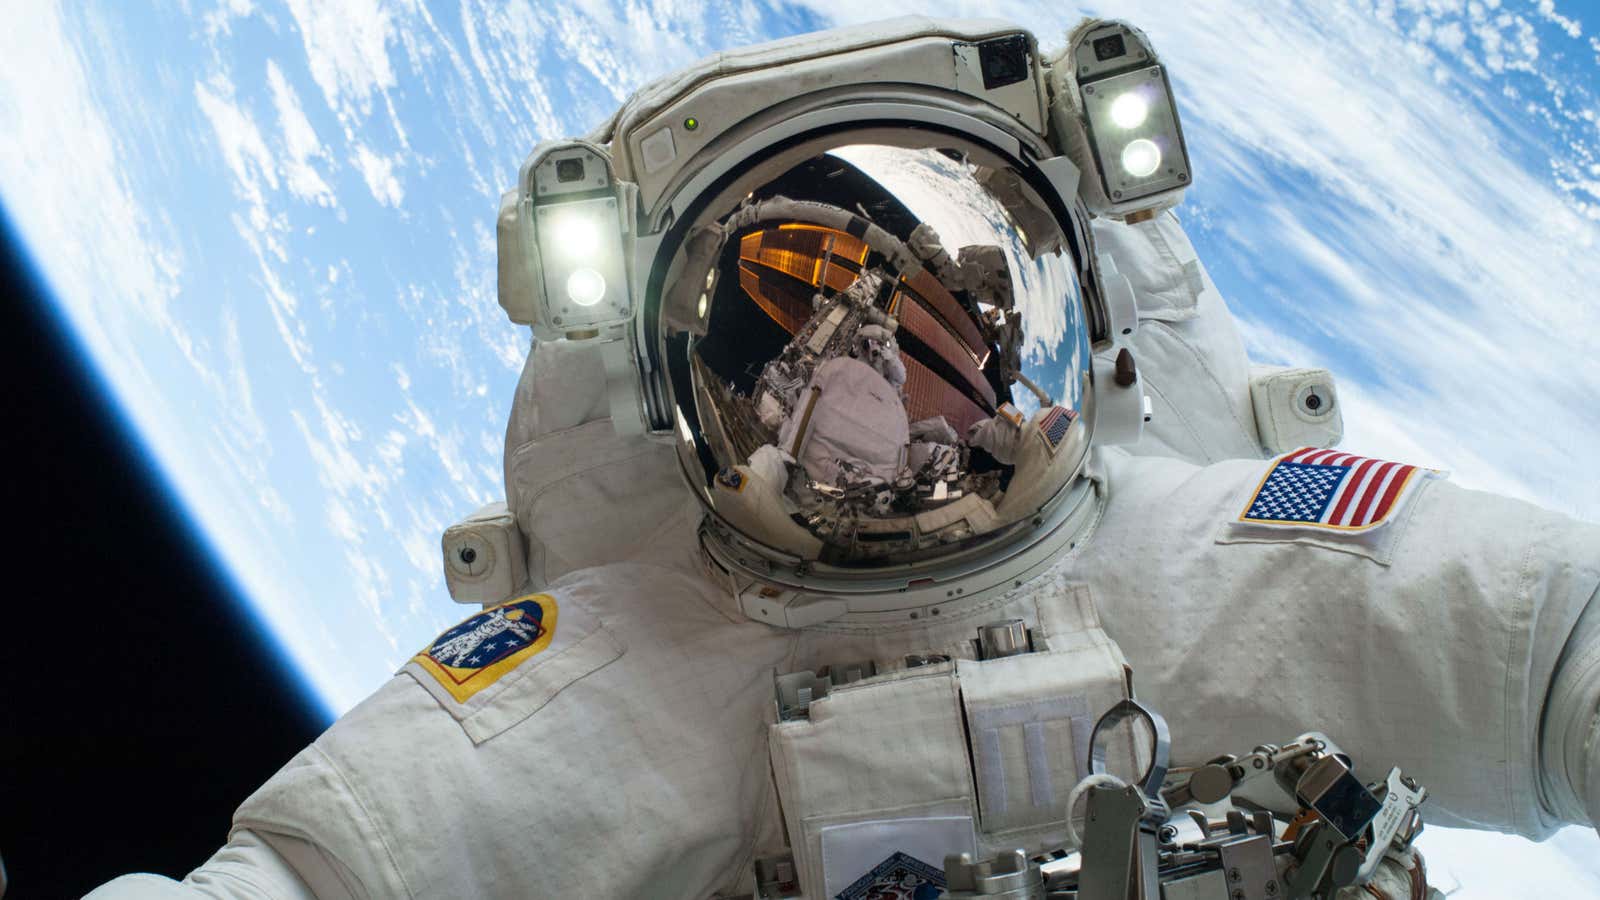 The famous “space selfie” taken by NASA astronaut Mike Hopkins in December 2013.